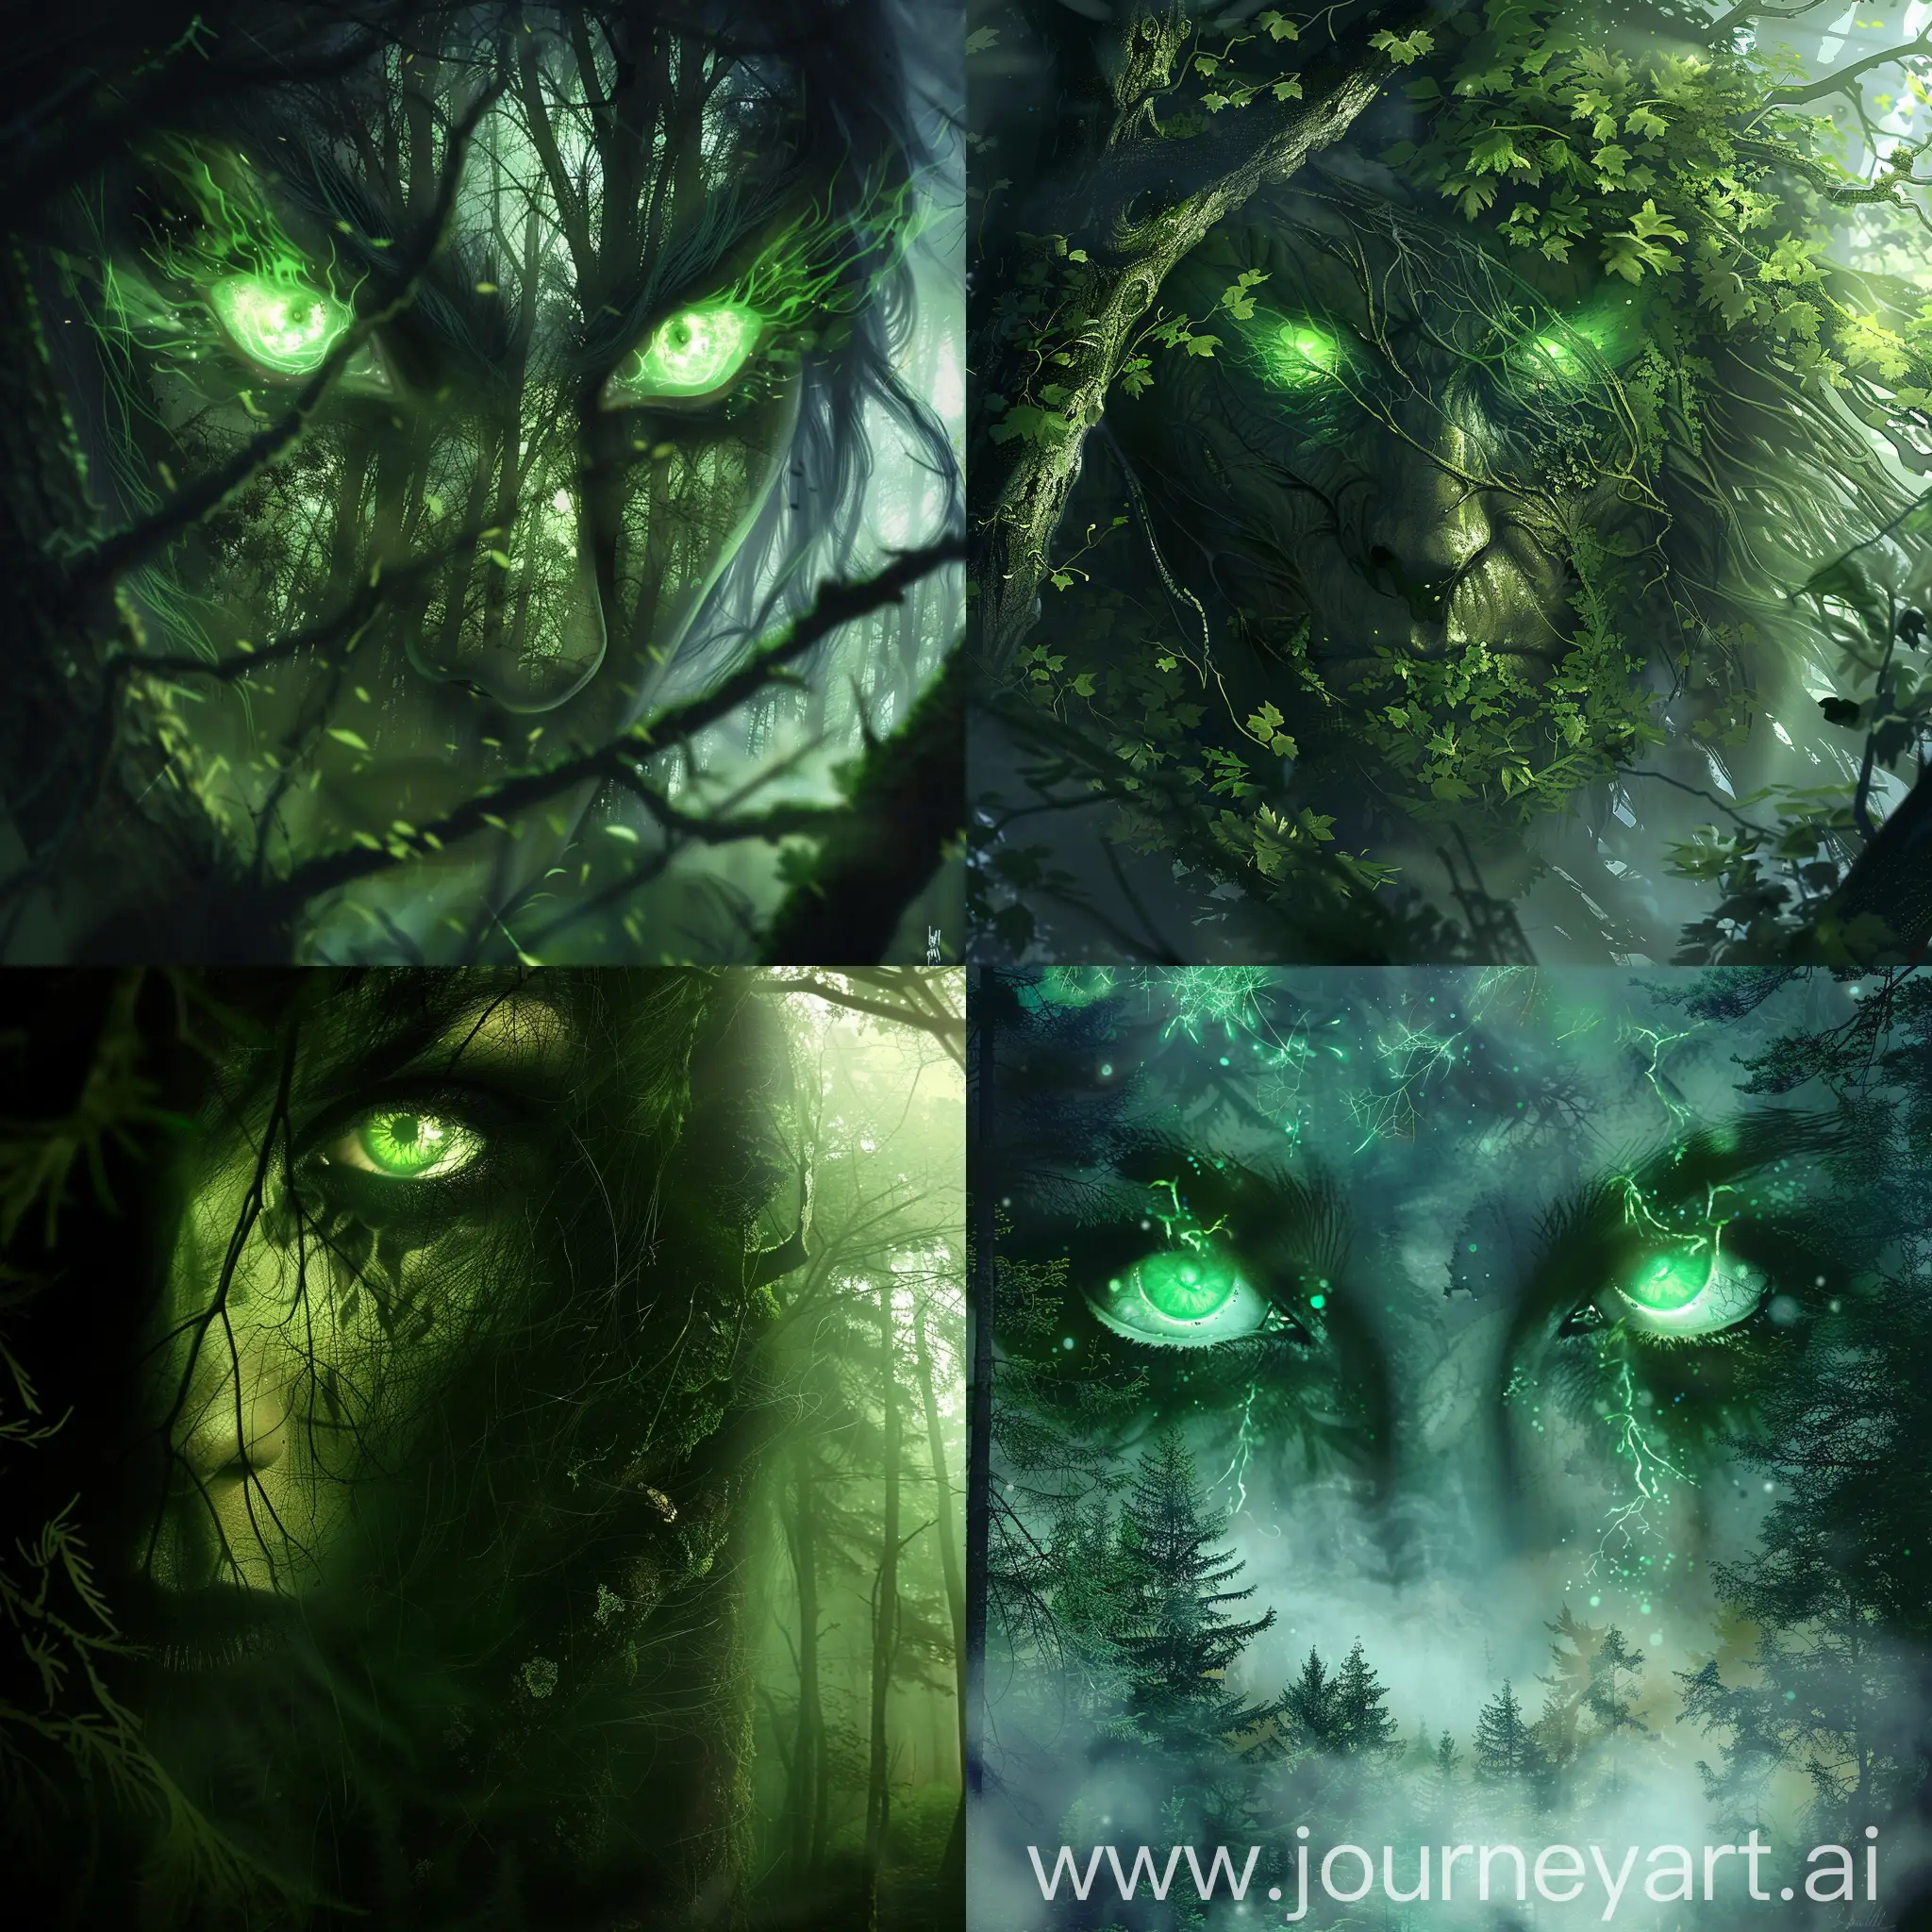 Druid of the forest. eyes glowing green in the trees